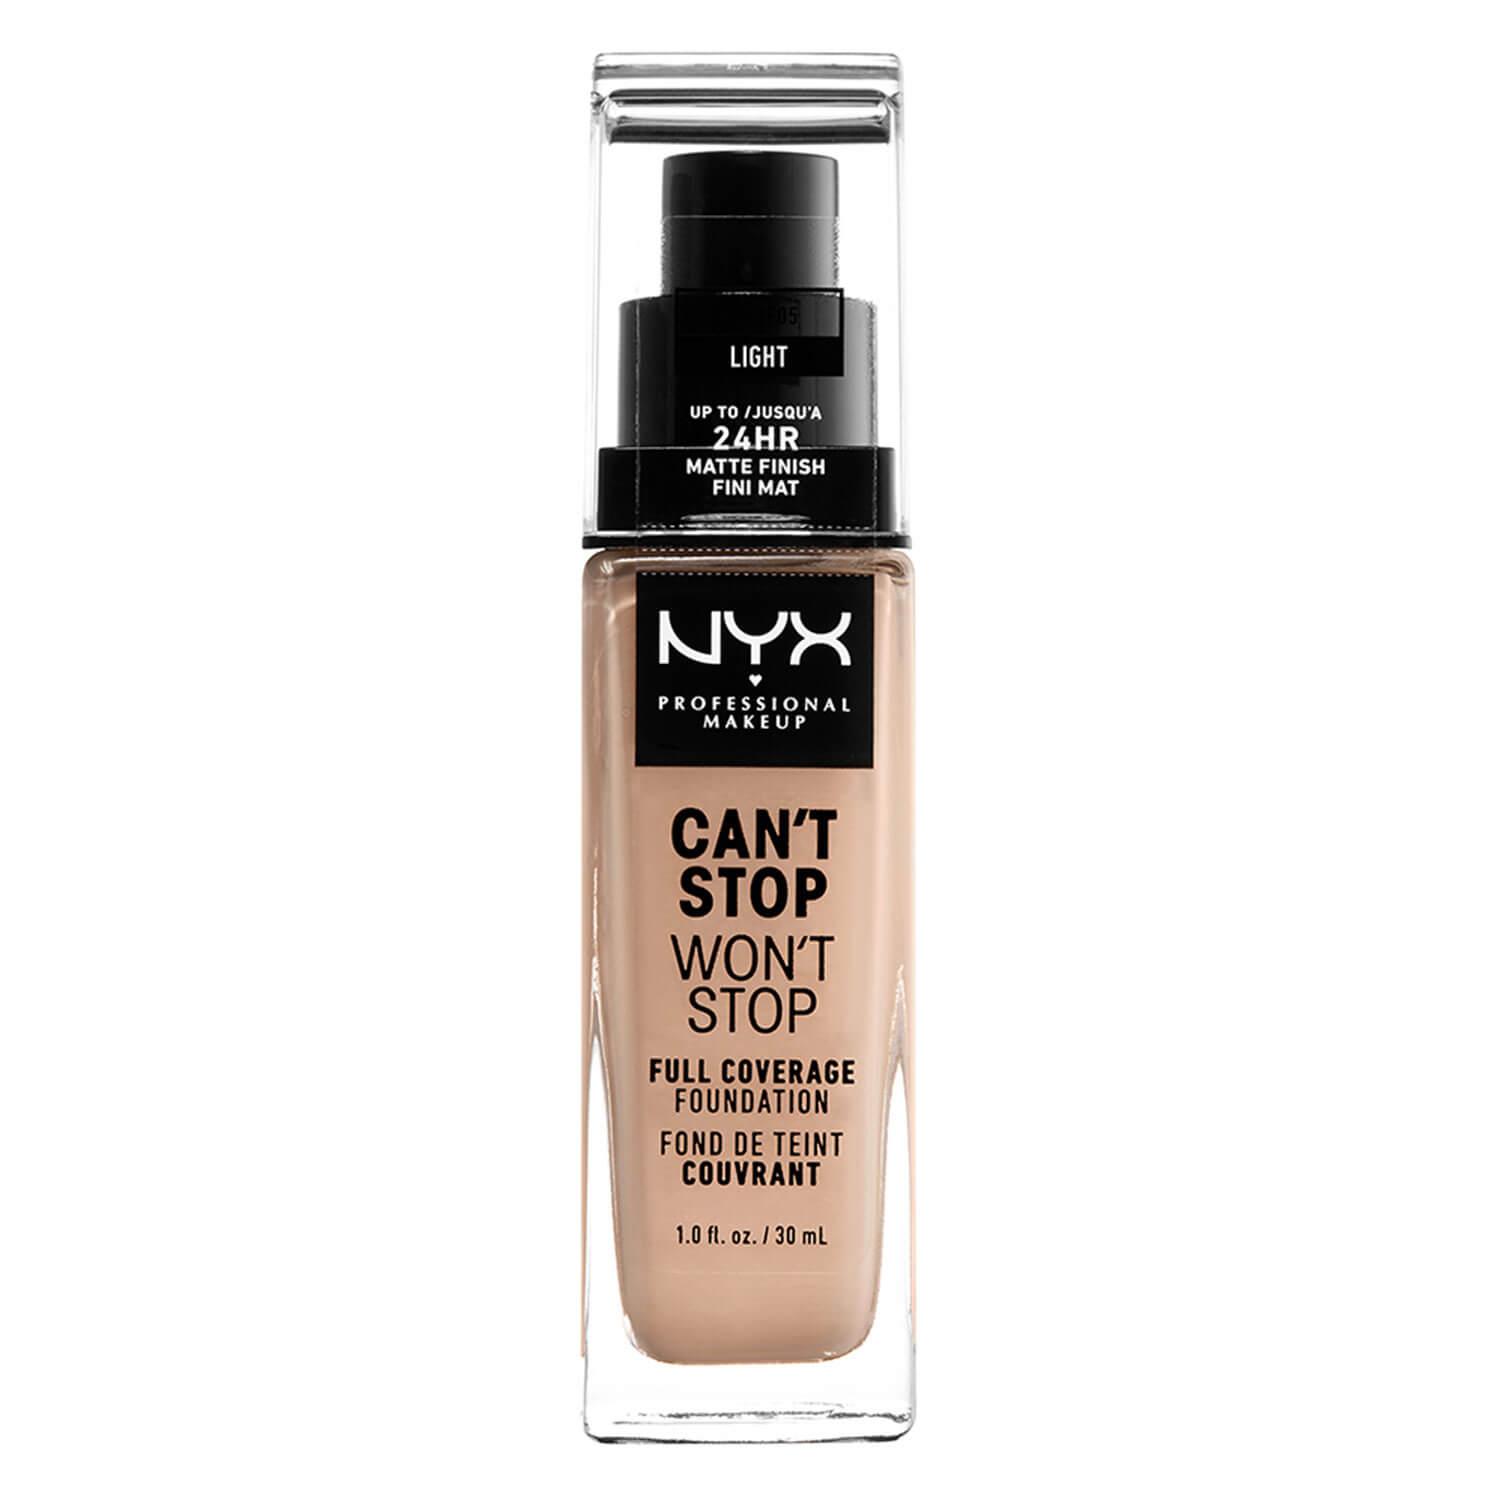 Can't Stop Won't Stop - Full Coverage Foundation Light